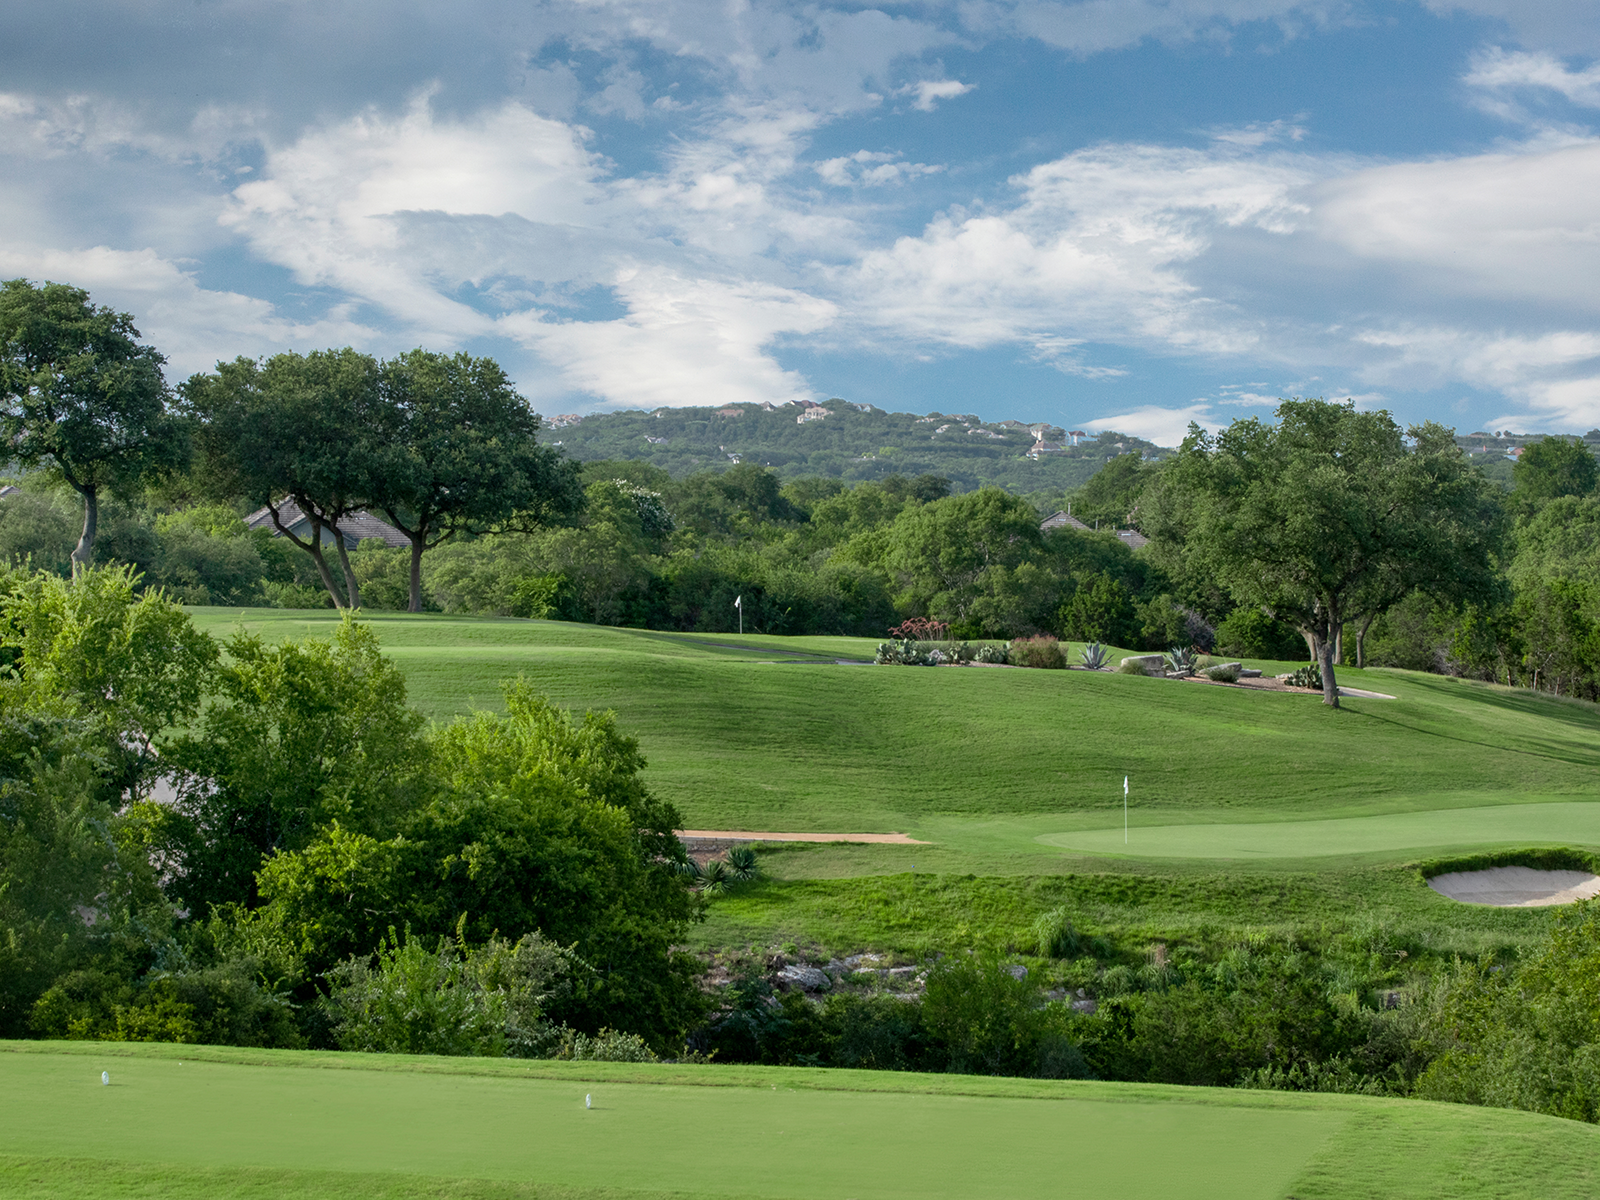 The Coore Crenshaw Cliffside Course at Omni Barton Creek.